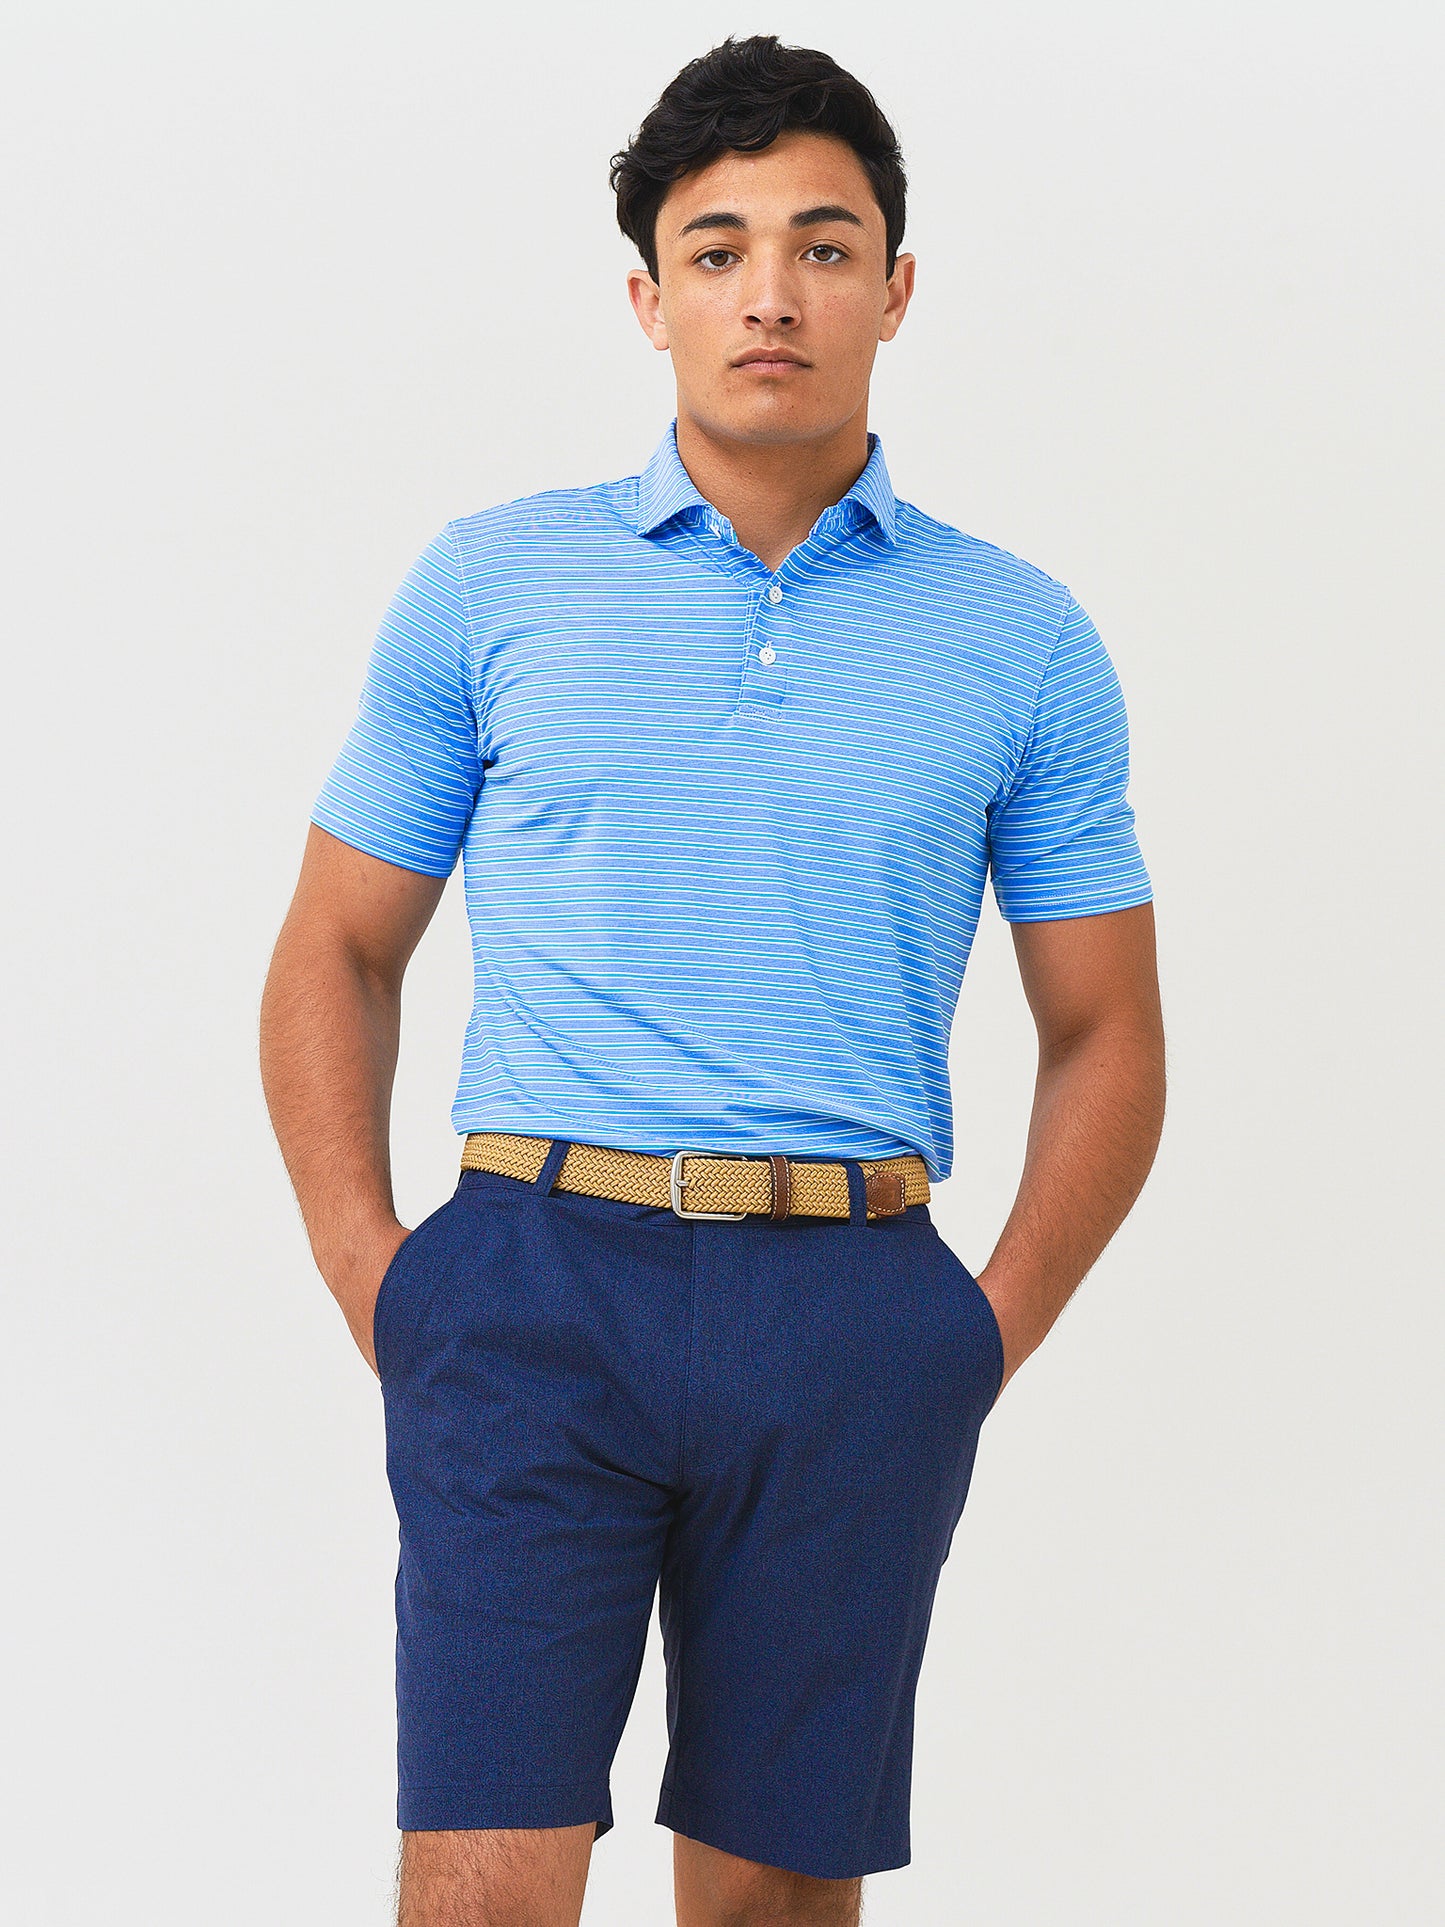 Holderness & Bourne Men's The Mitchell Polo